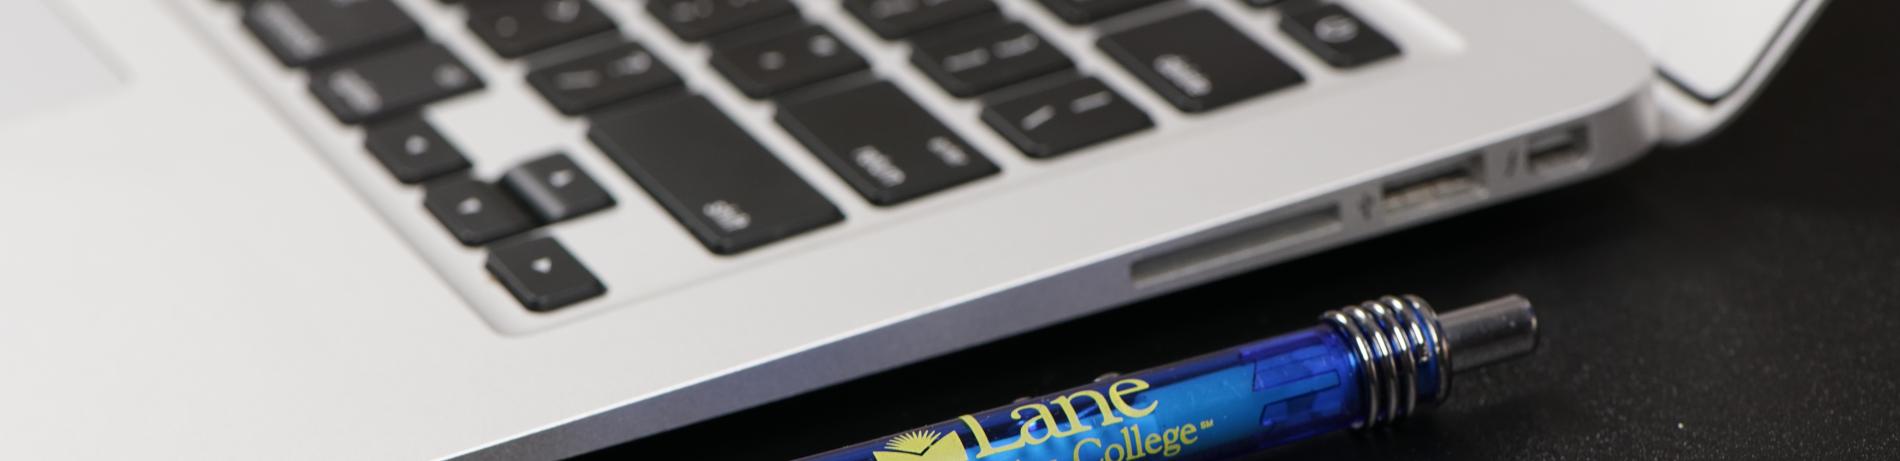 close up of laptop with an lcc-branded pen next to it